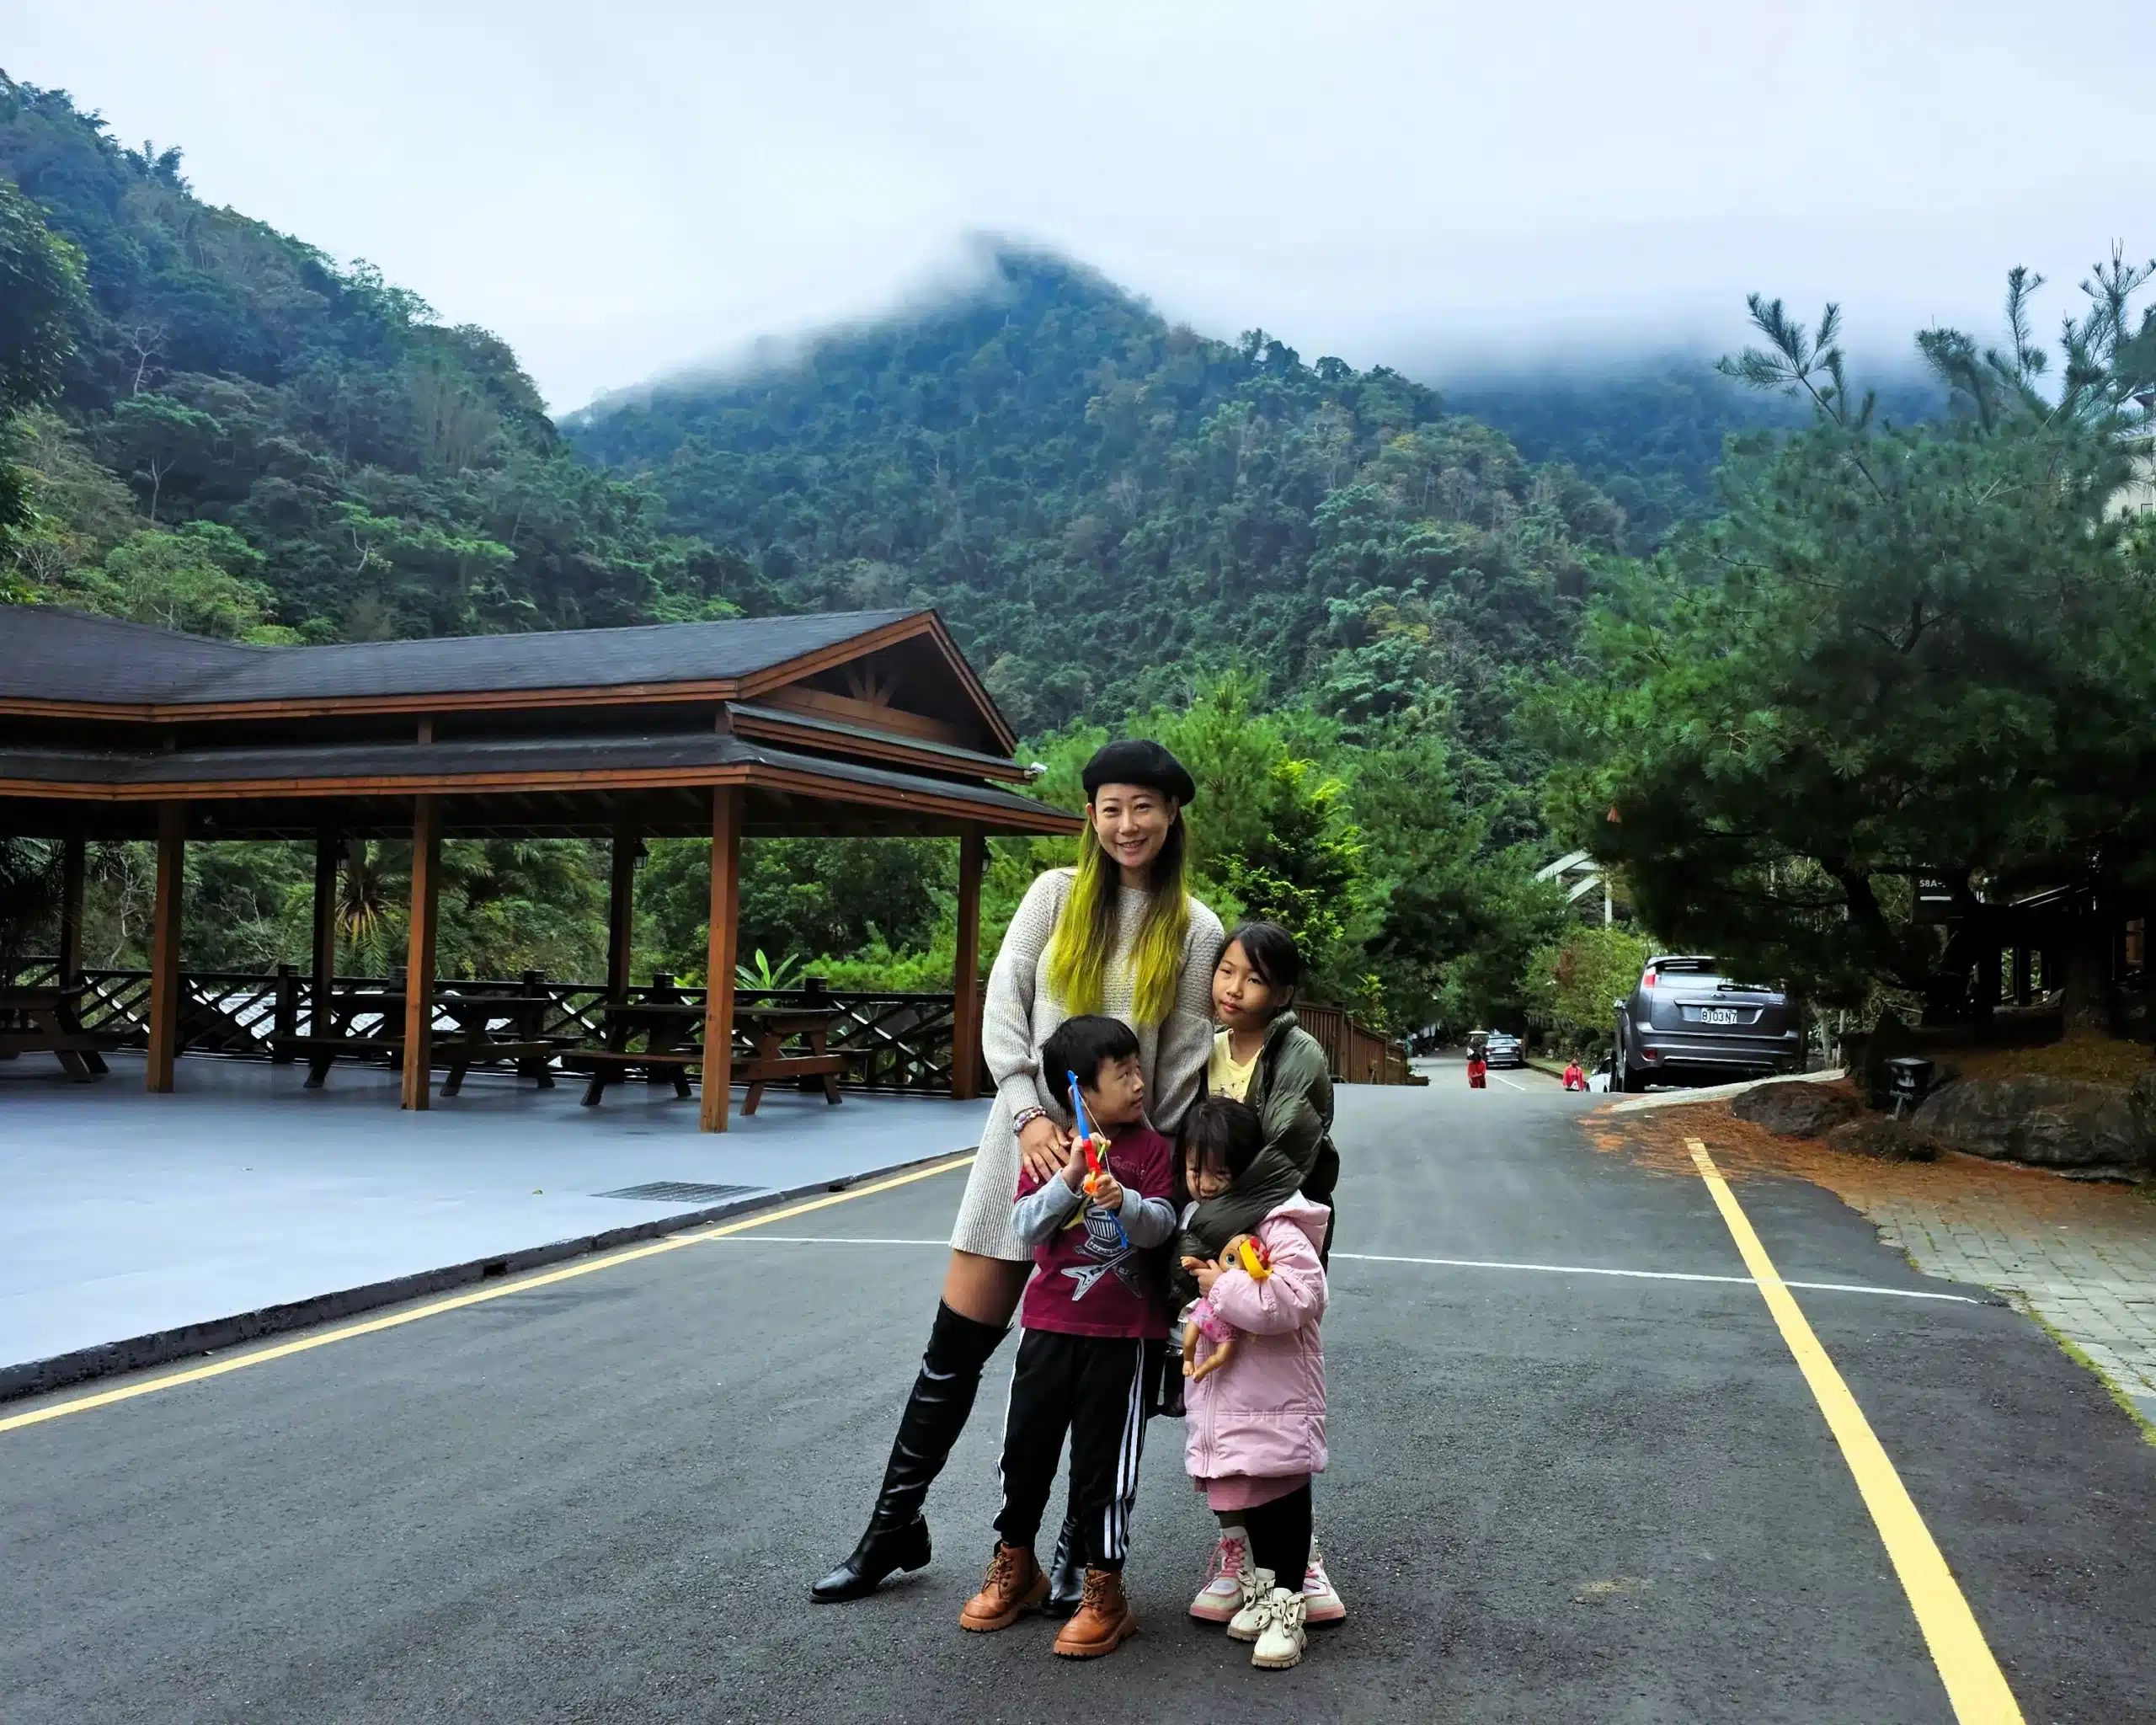 Family-friendly Attractions and Accommodations in Miaoli - Dahu 2